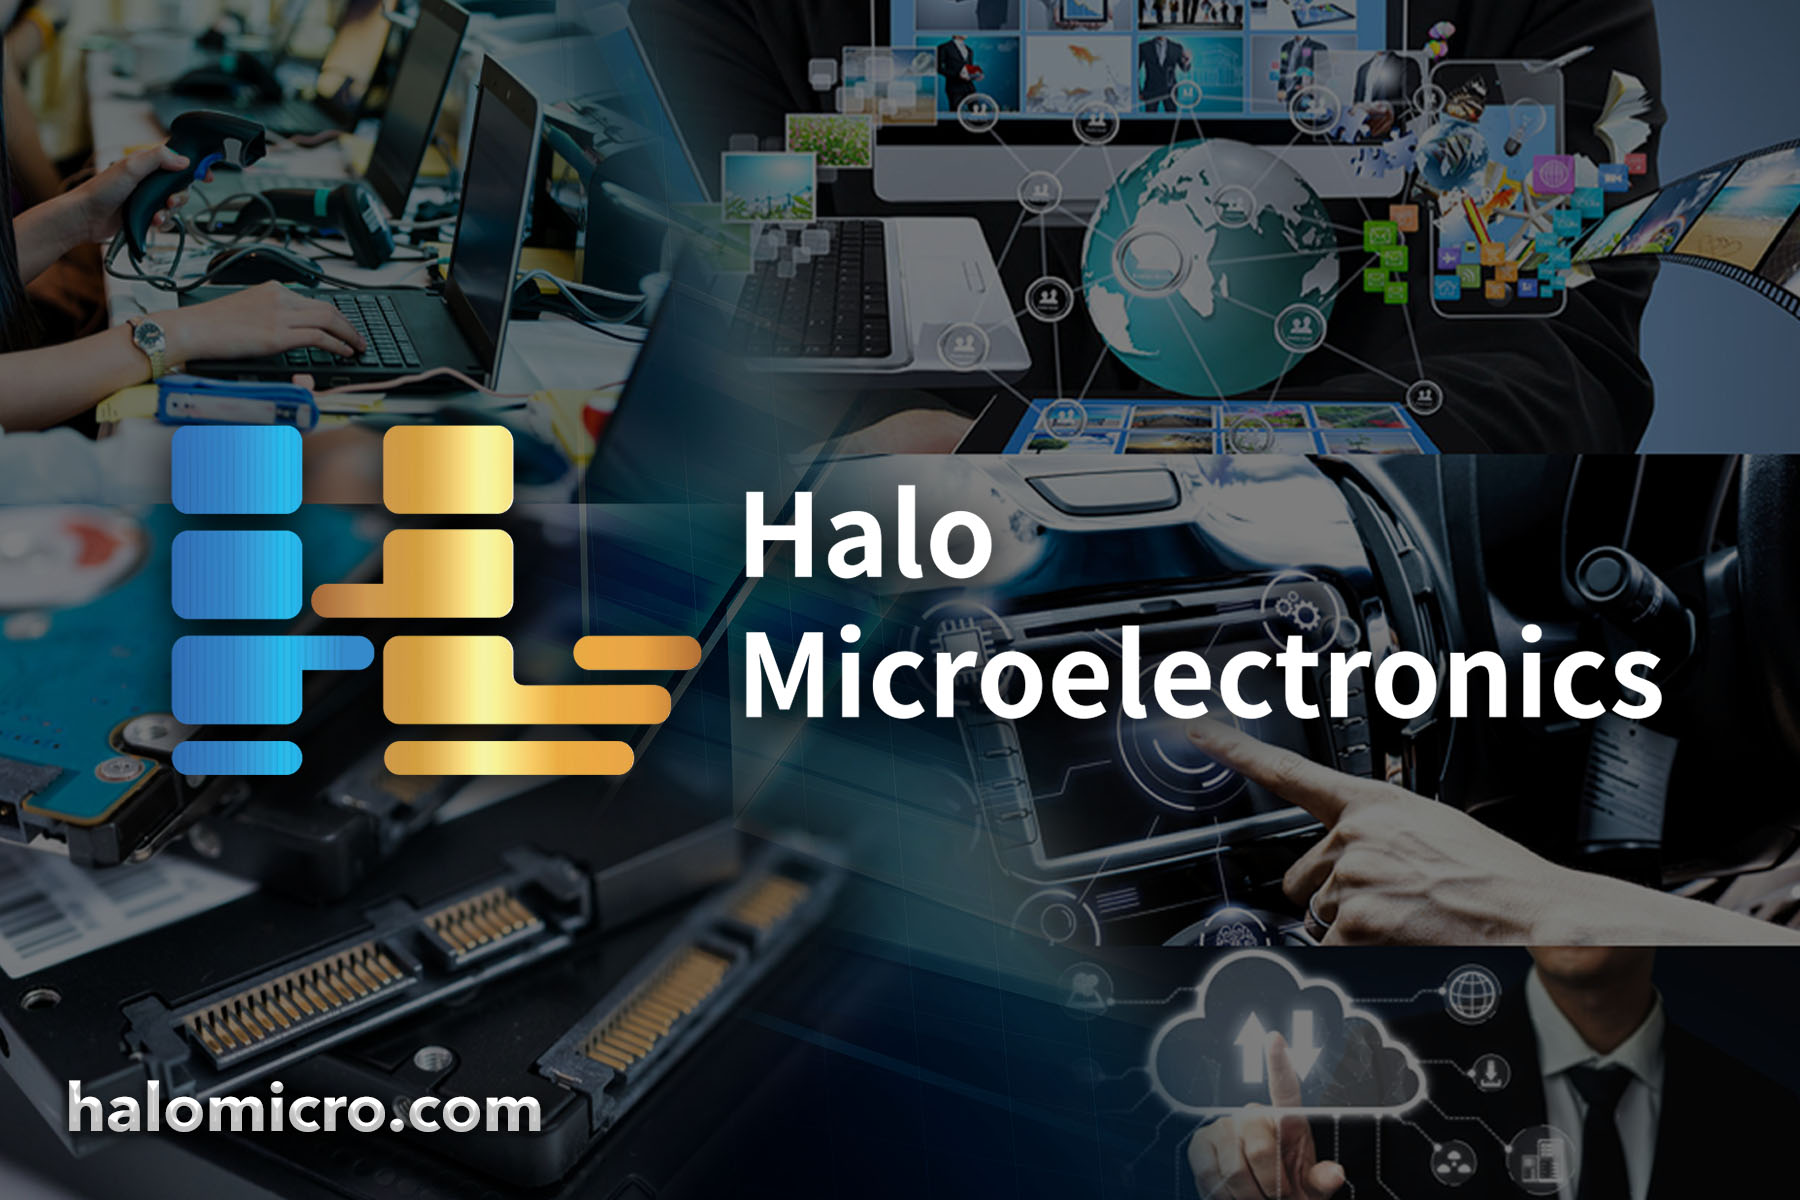 Halo Microelectronics Agrees to Sell Its AC-DC Silicon Controller IC Venture